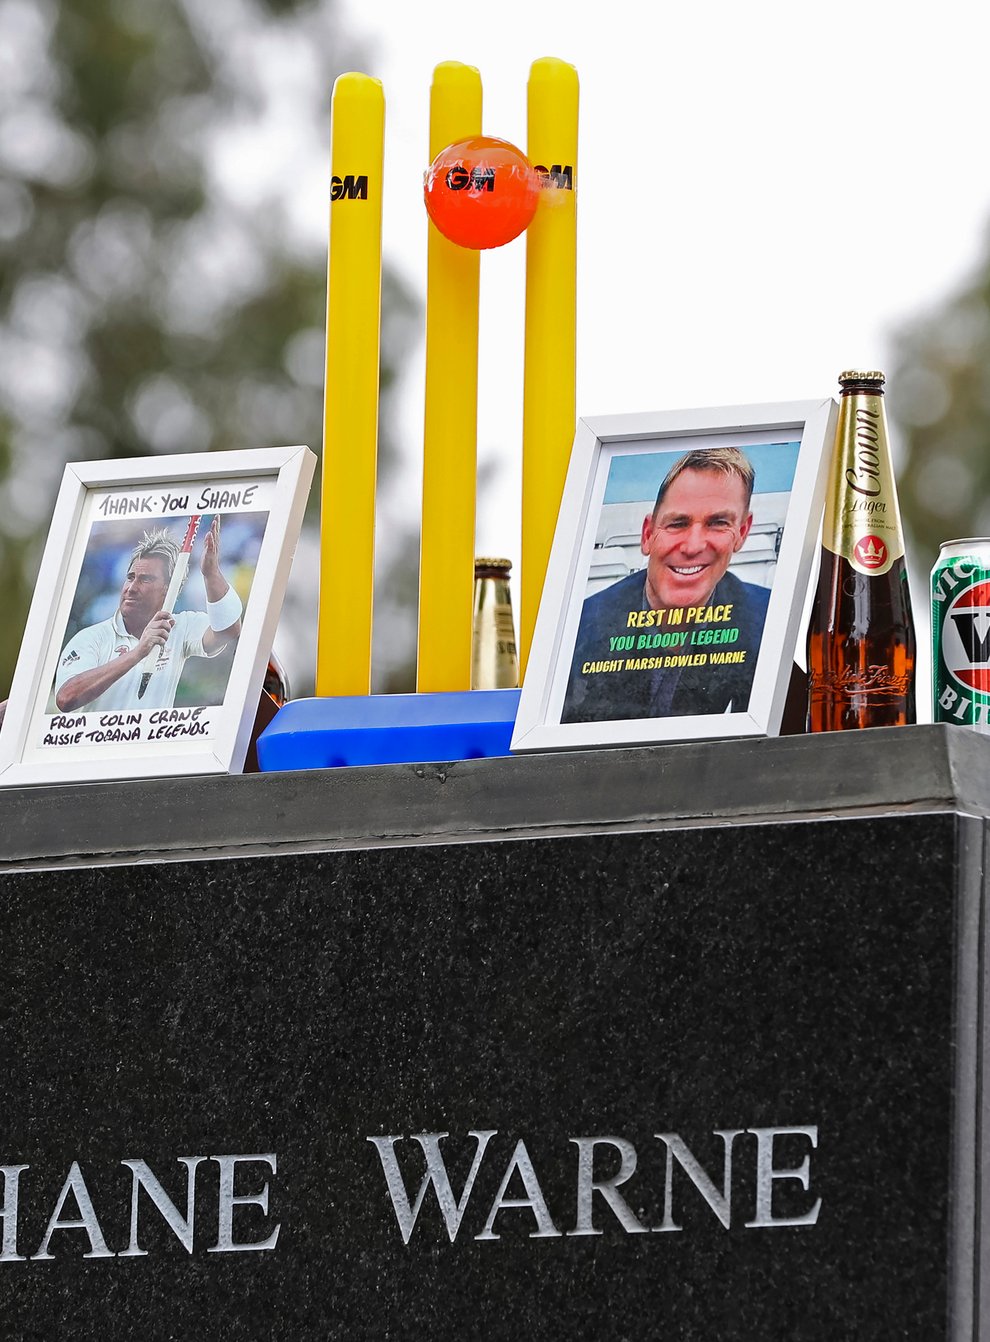 Fans across the world have paid their respects to Shane Warne (AP Photo/Asanka Brendon Ratnayake)